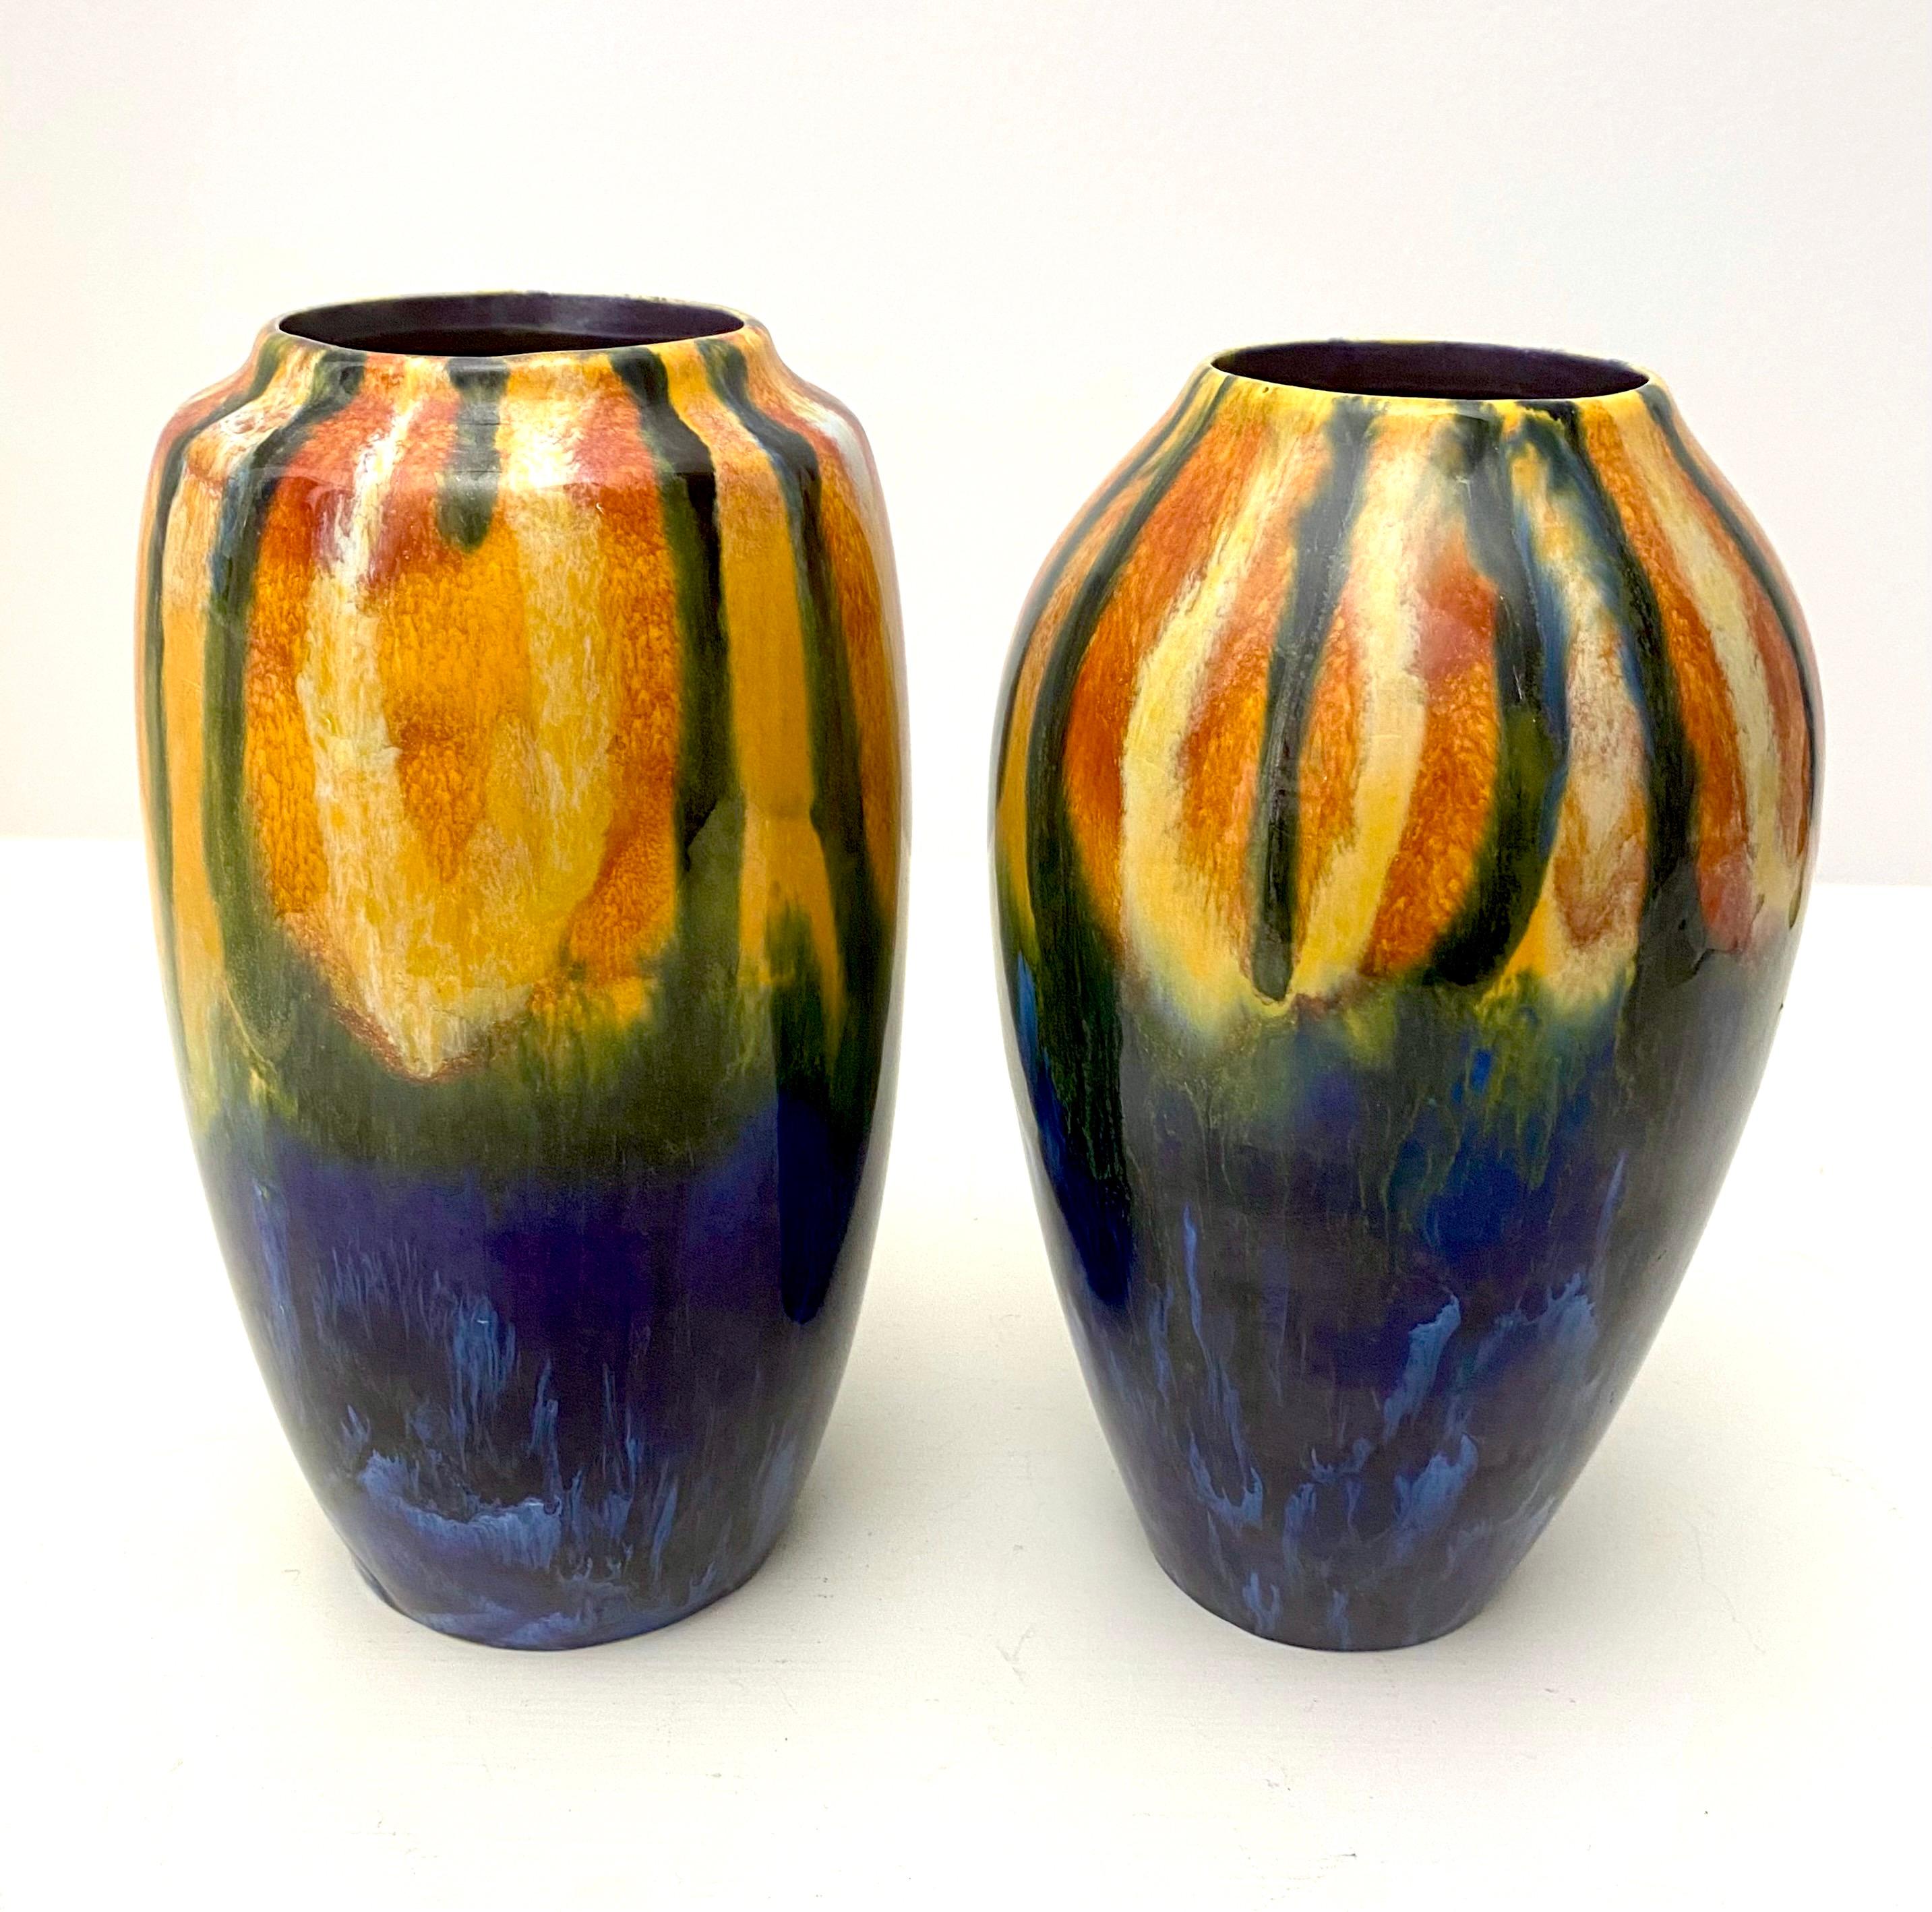 Stunning near pair of cobalt, orange, green, maroon and yellow early czech vases by coronet. A great visual feast for early 20th century collectors. Each one is signed on the bottom and each vase has a slightly different shape and size of the